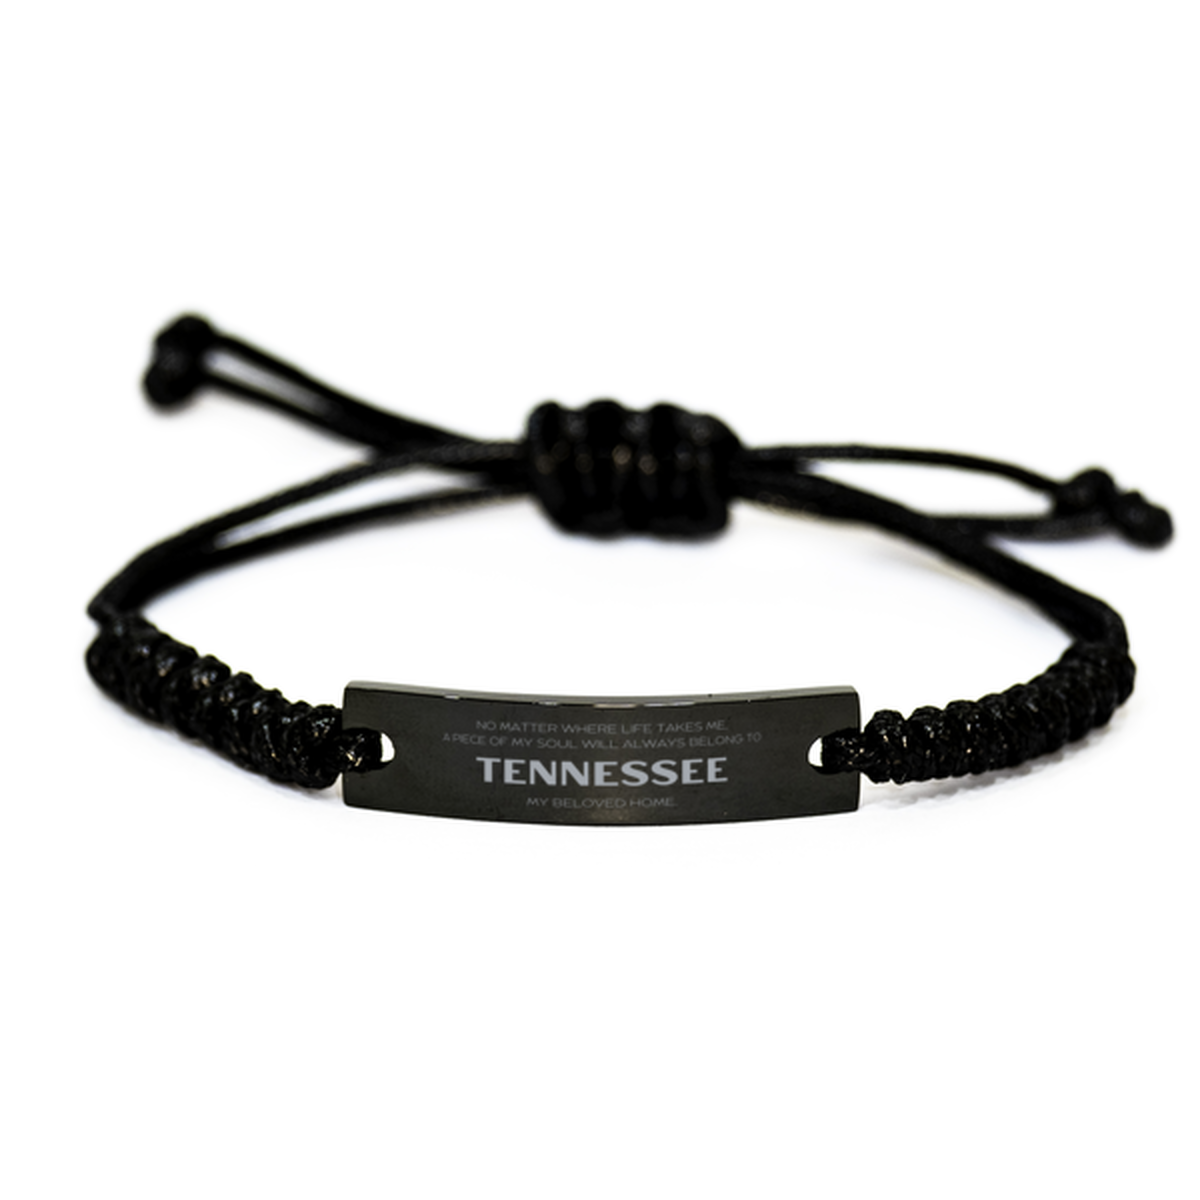 Love Tennessee State Gifts, My soul will always belong to Tennessee, Proud Black Rope Bracelet, Birthday Unique Gifts For Tennessee Men, Women, Friends